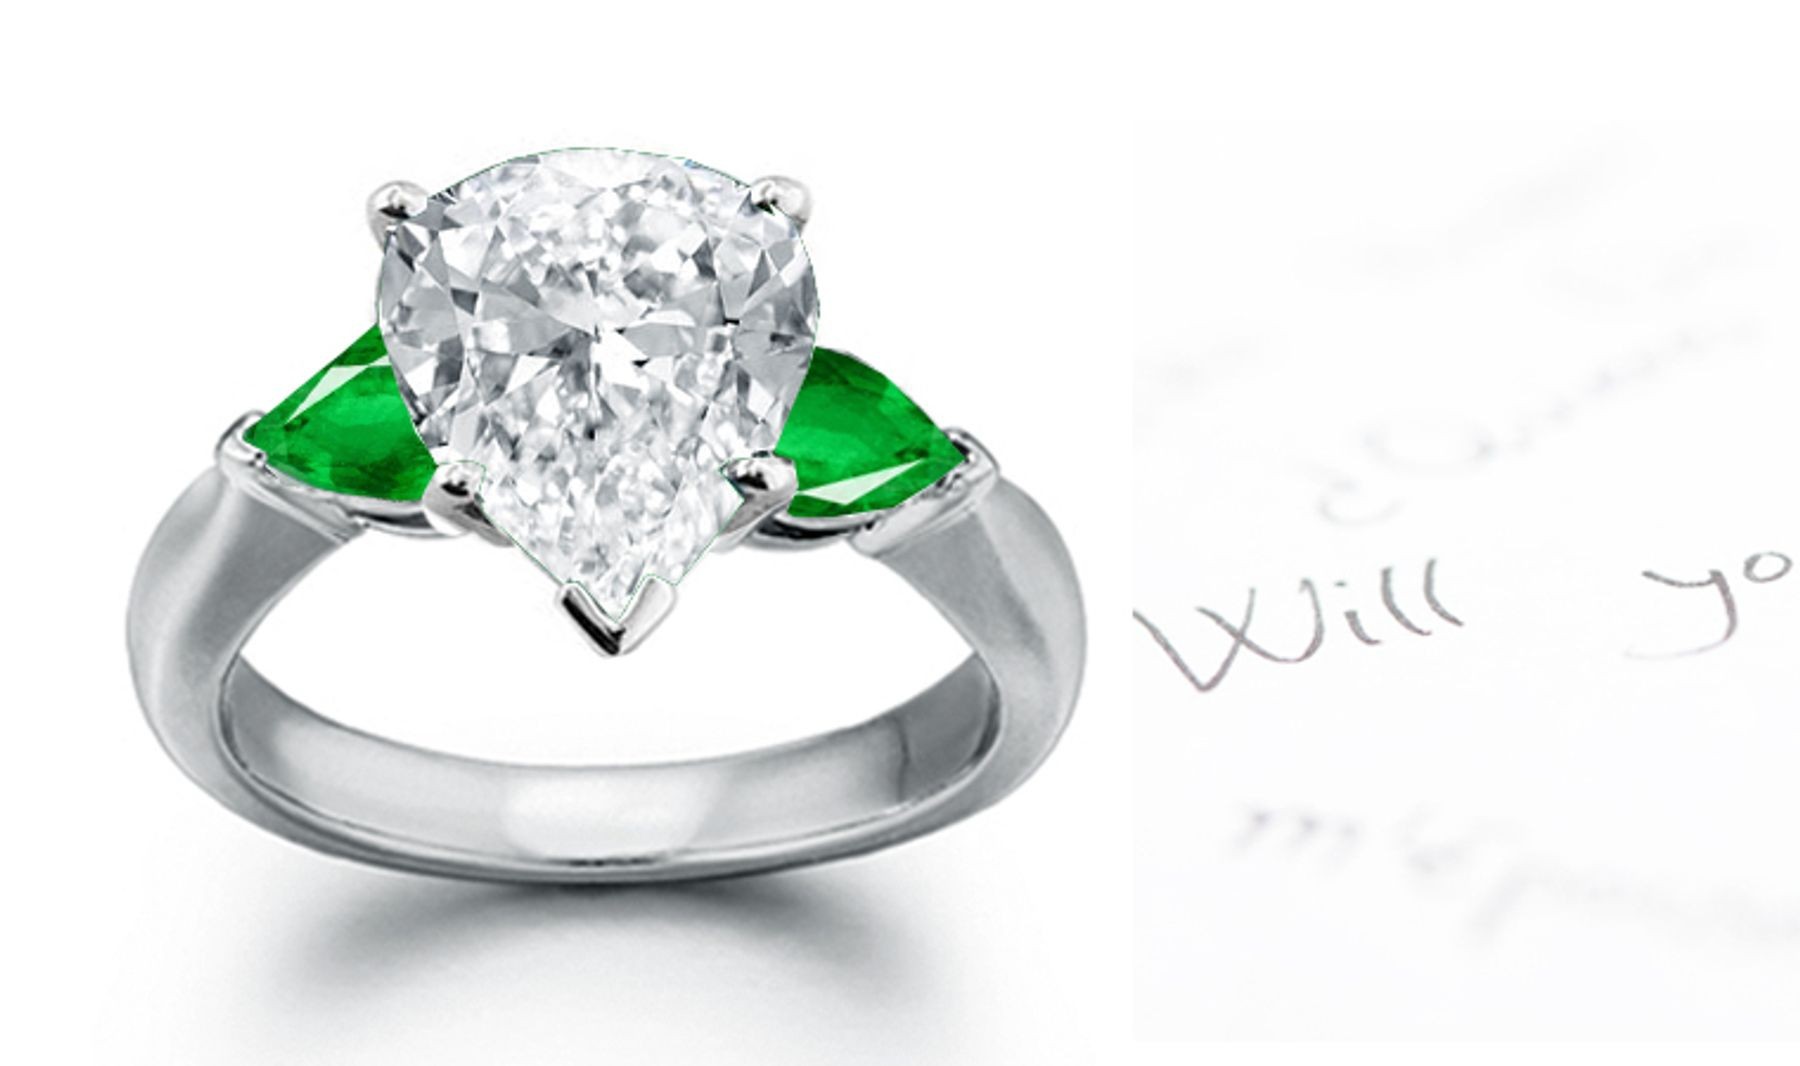 Special Designs: Half Hoop, three stones in plain platinum mounting Center pear-shaped Emerald & Diamond pear-shaped sides 